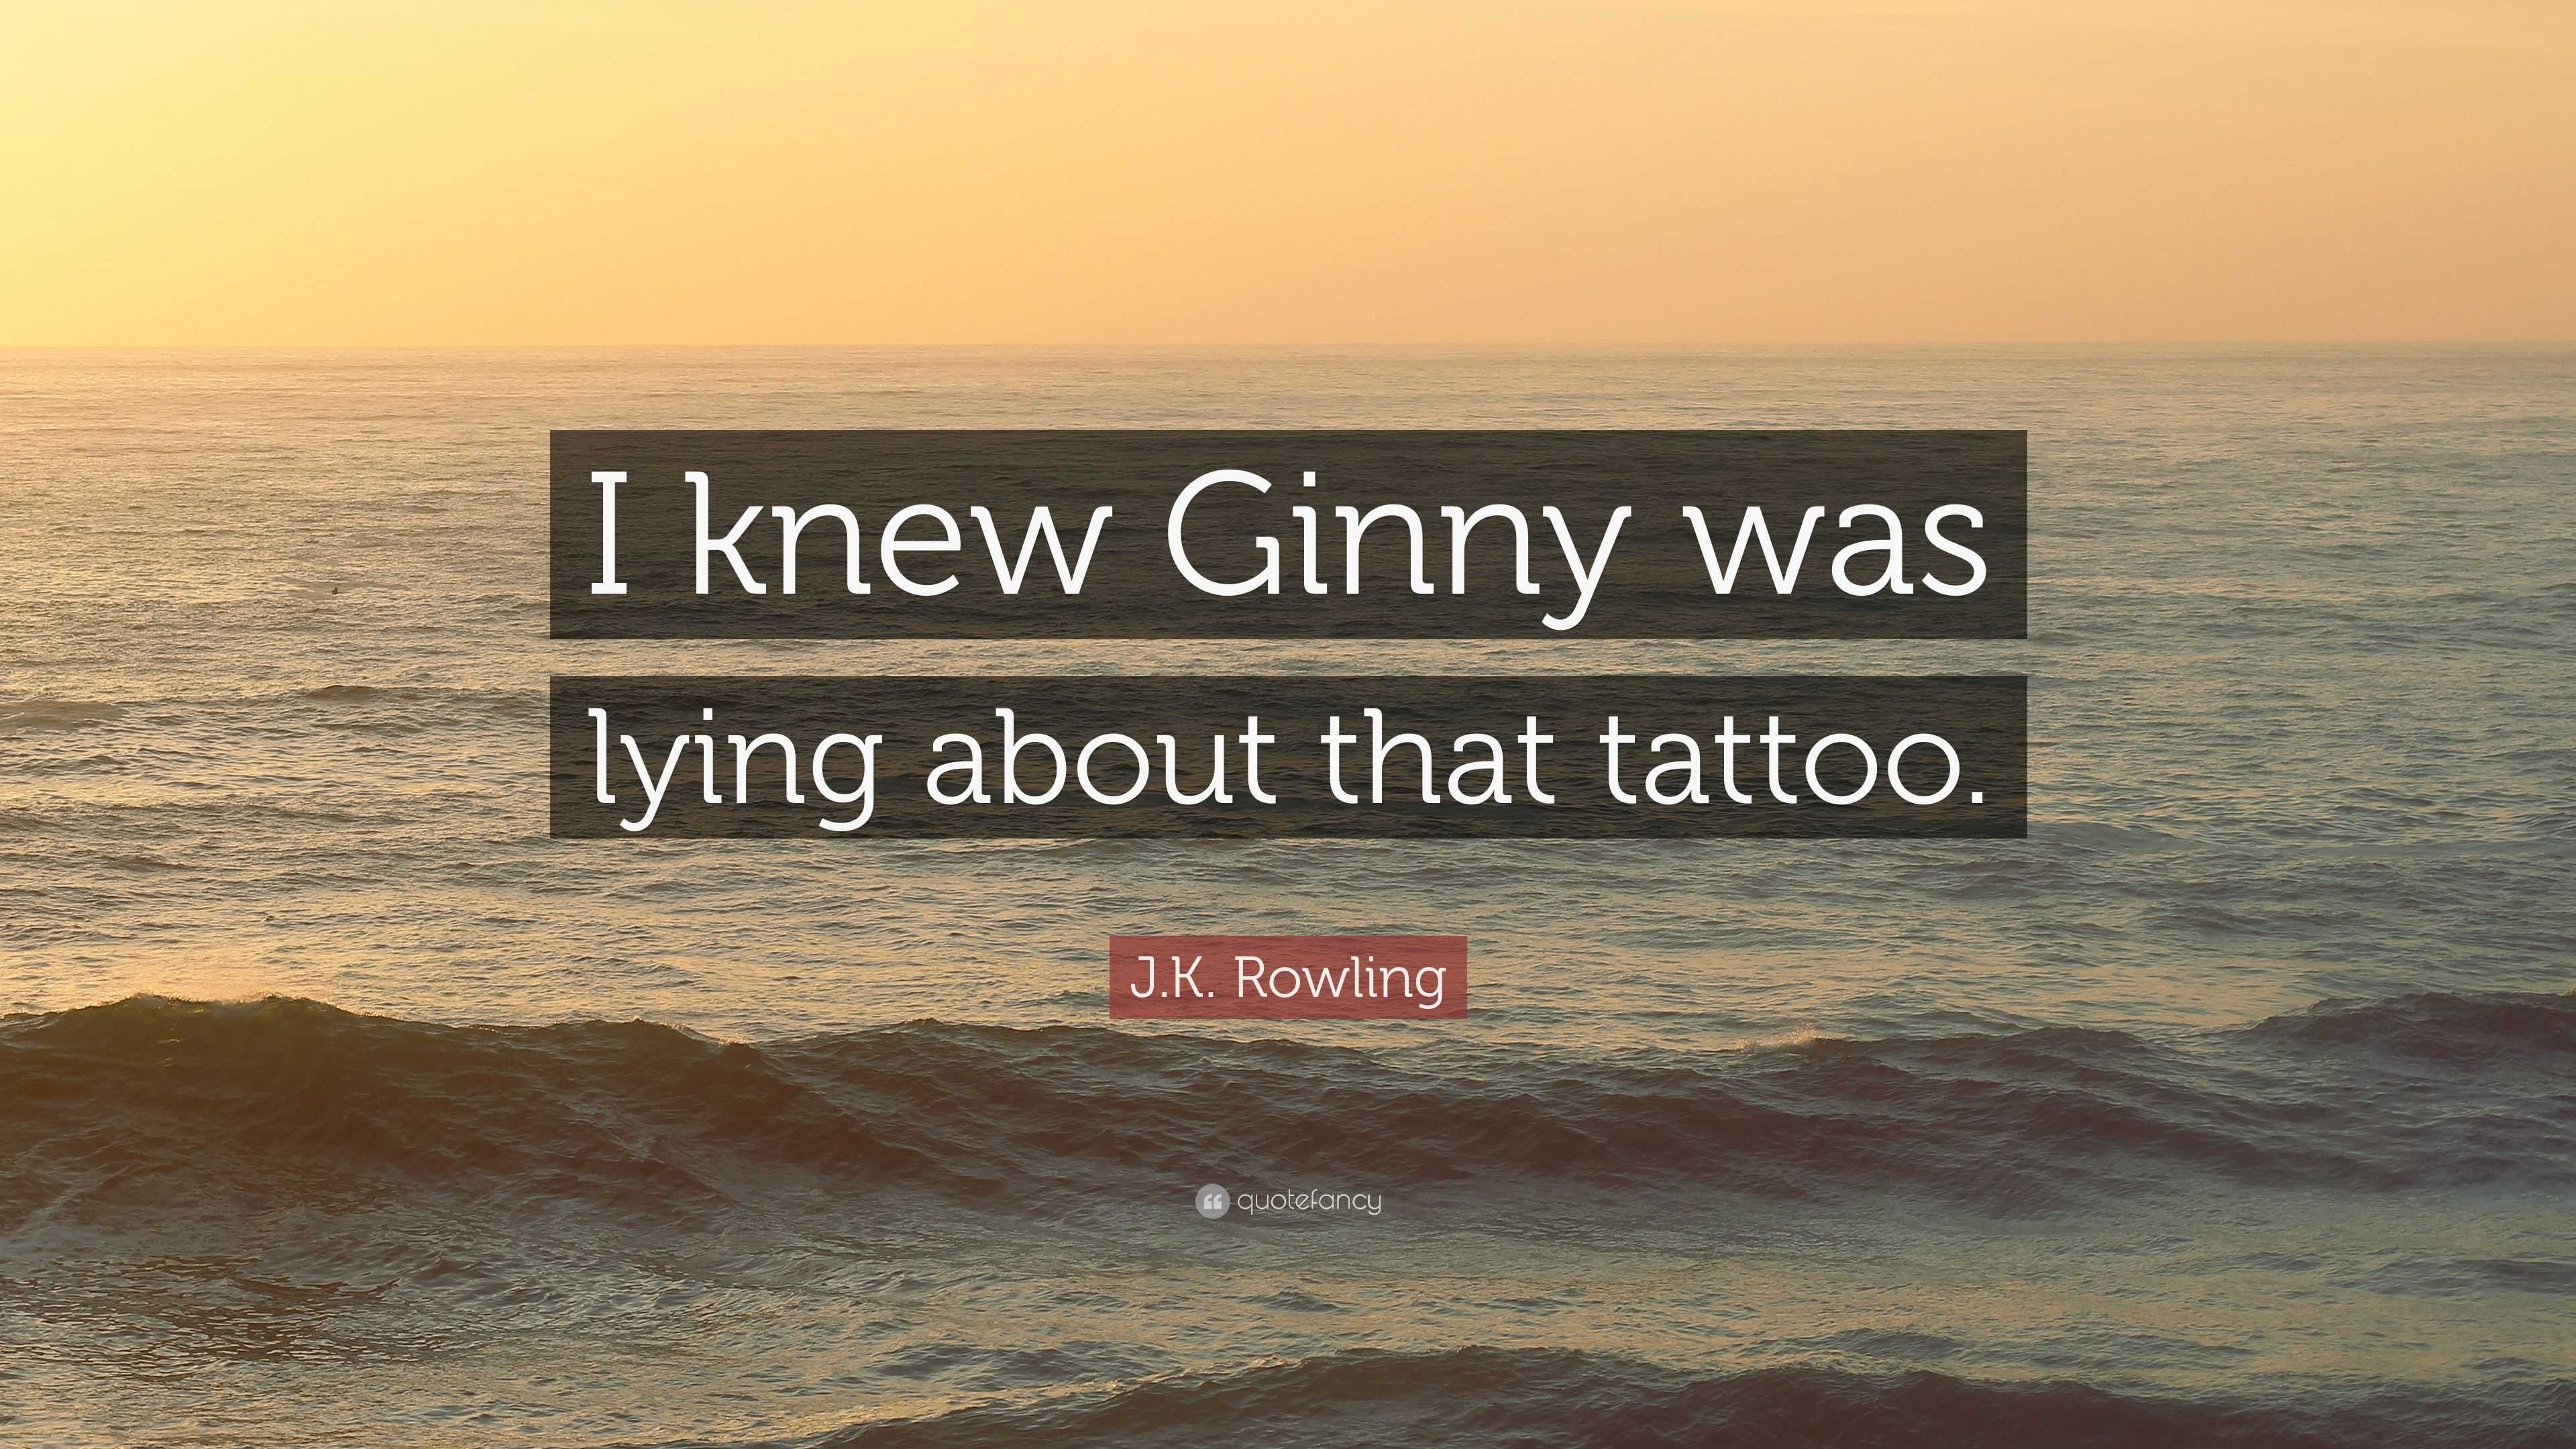 JK Rowling has a latin tattoo on her wrist  but says a Harry Potter  inking would be weird  ridiculous  The Sun